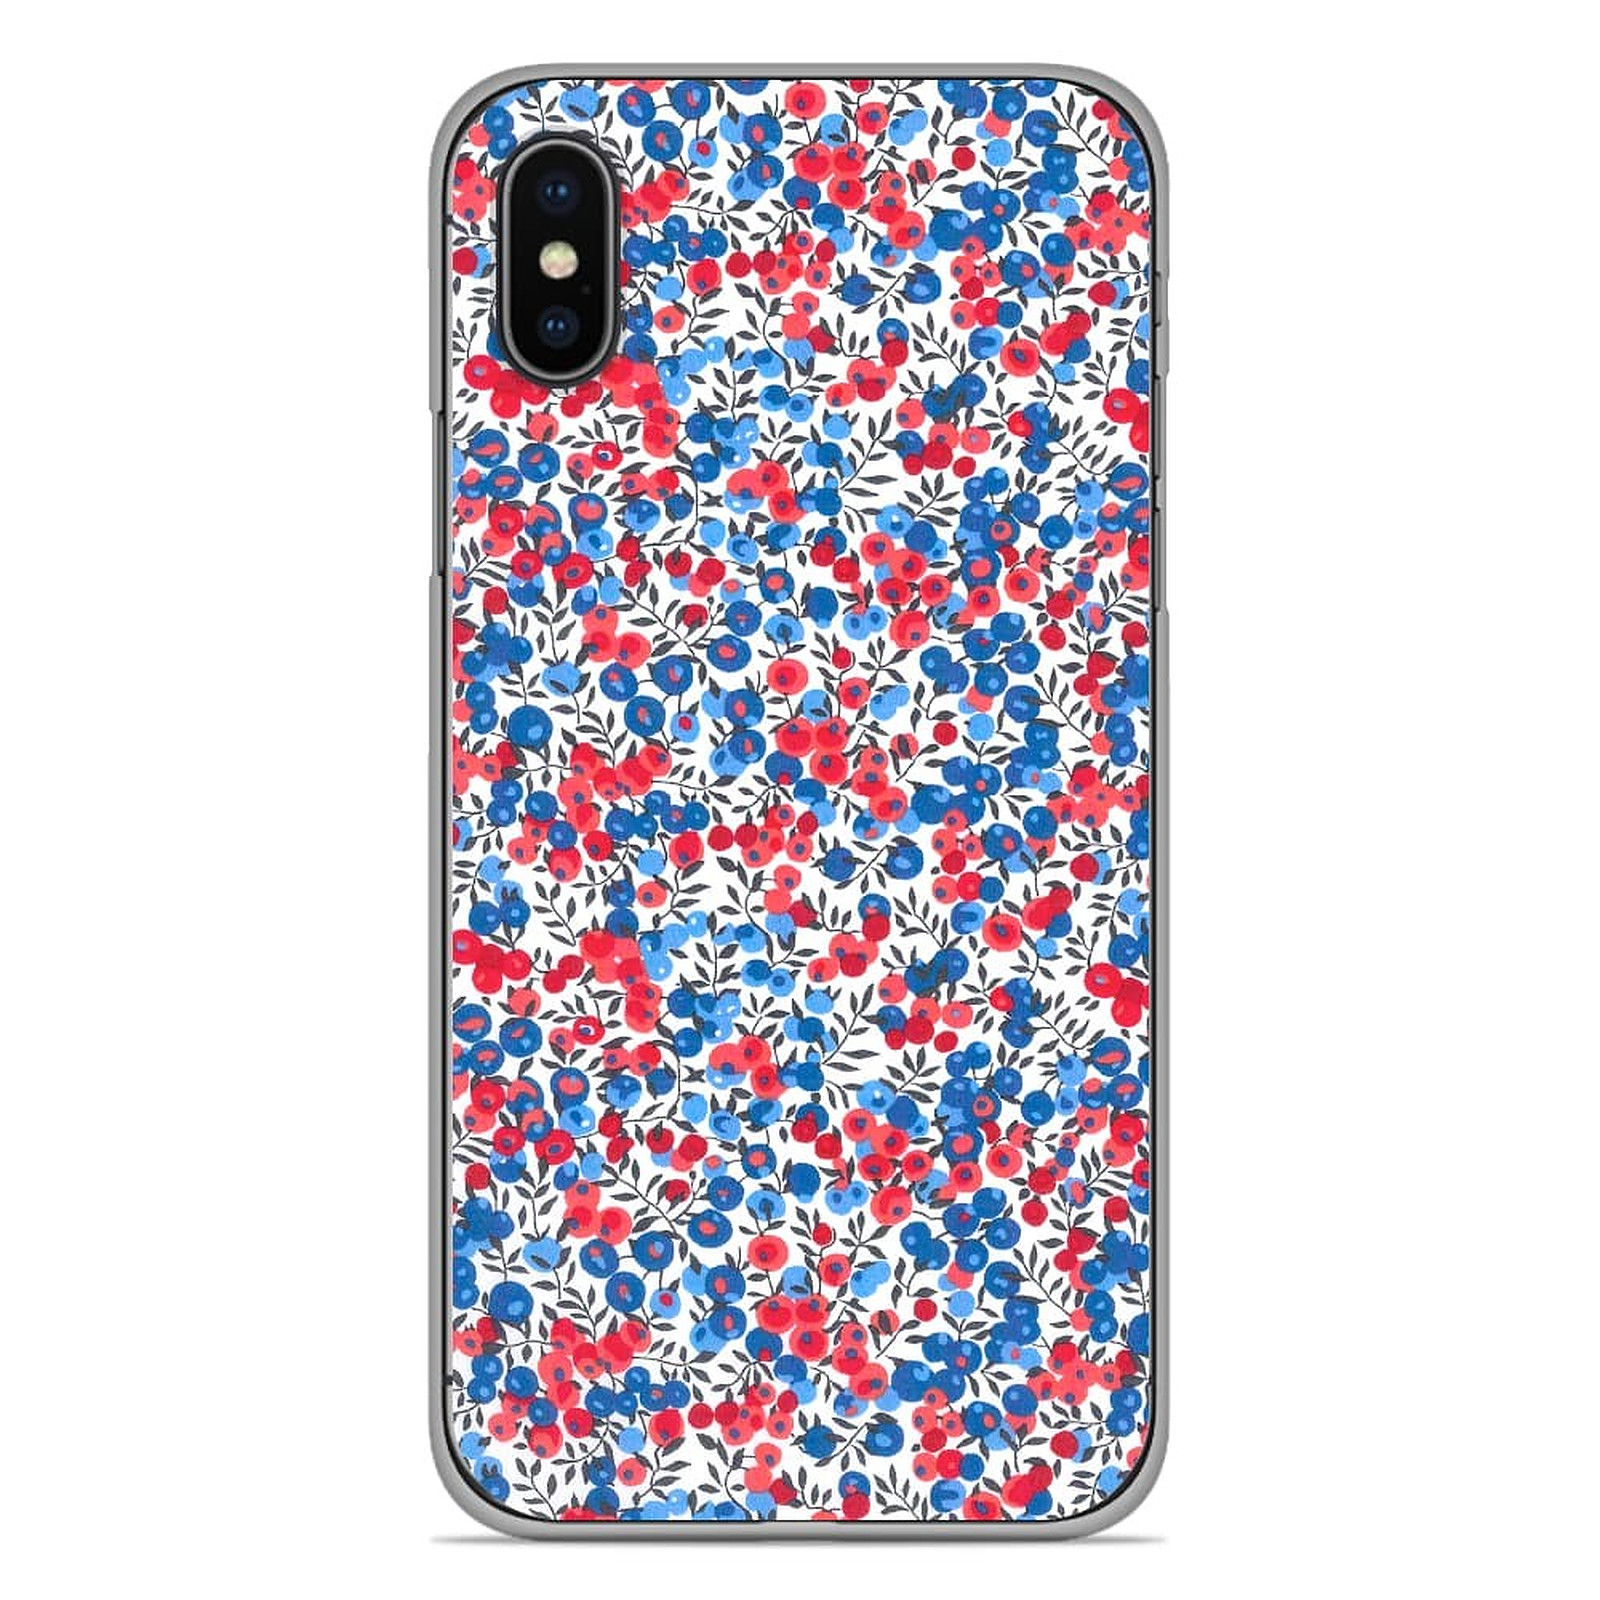 1001 Coques Coque silicone gel Apple iPhone XS Max motif Liberty Wiltshire Bleu - Coque telephone 1001Coques